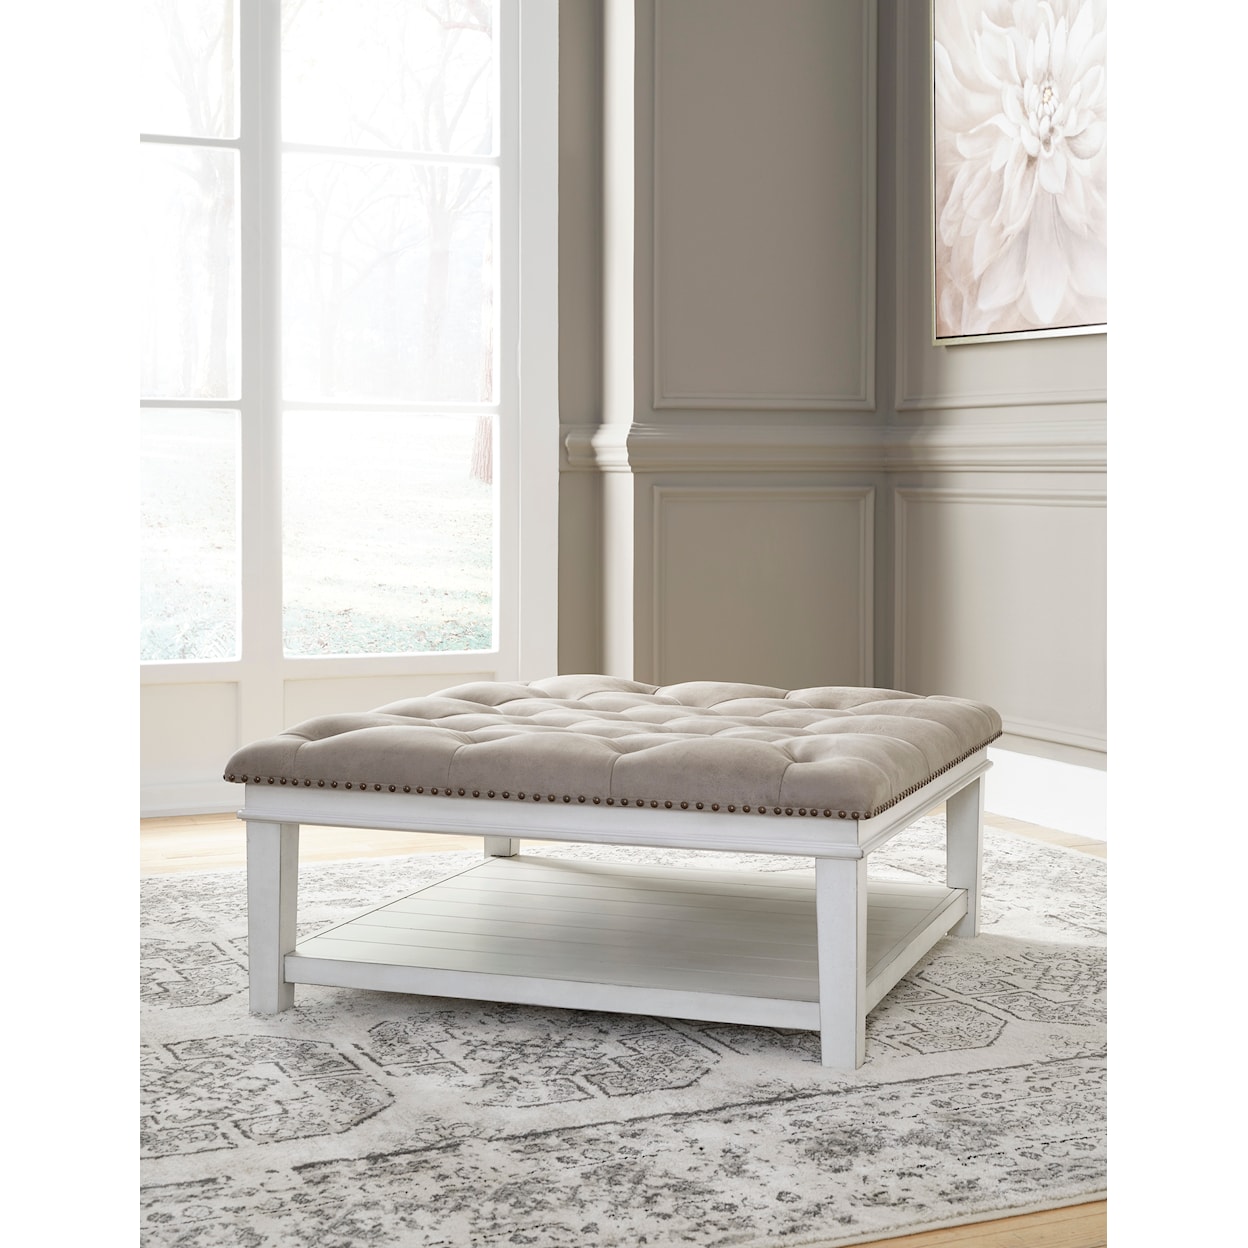 Signature Kanwyn Upholstered Ottoman Coffee Table